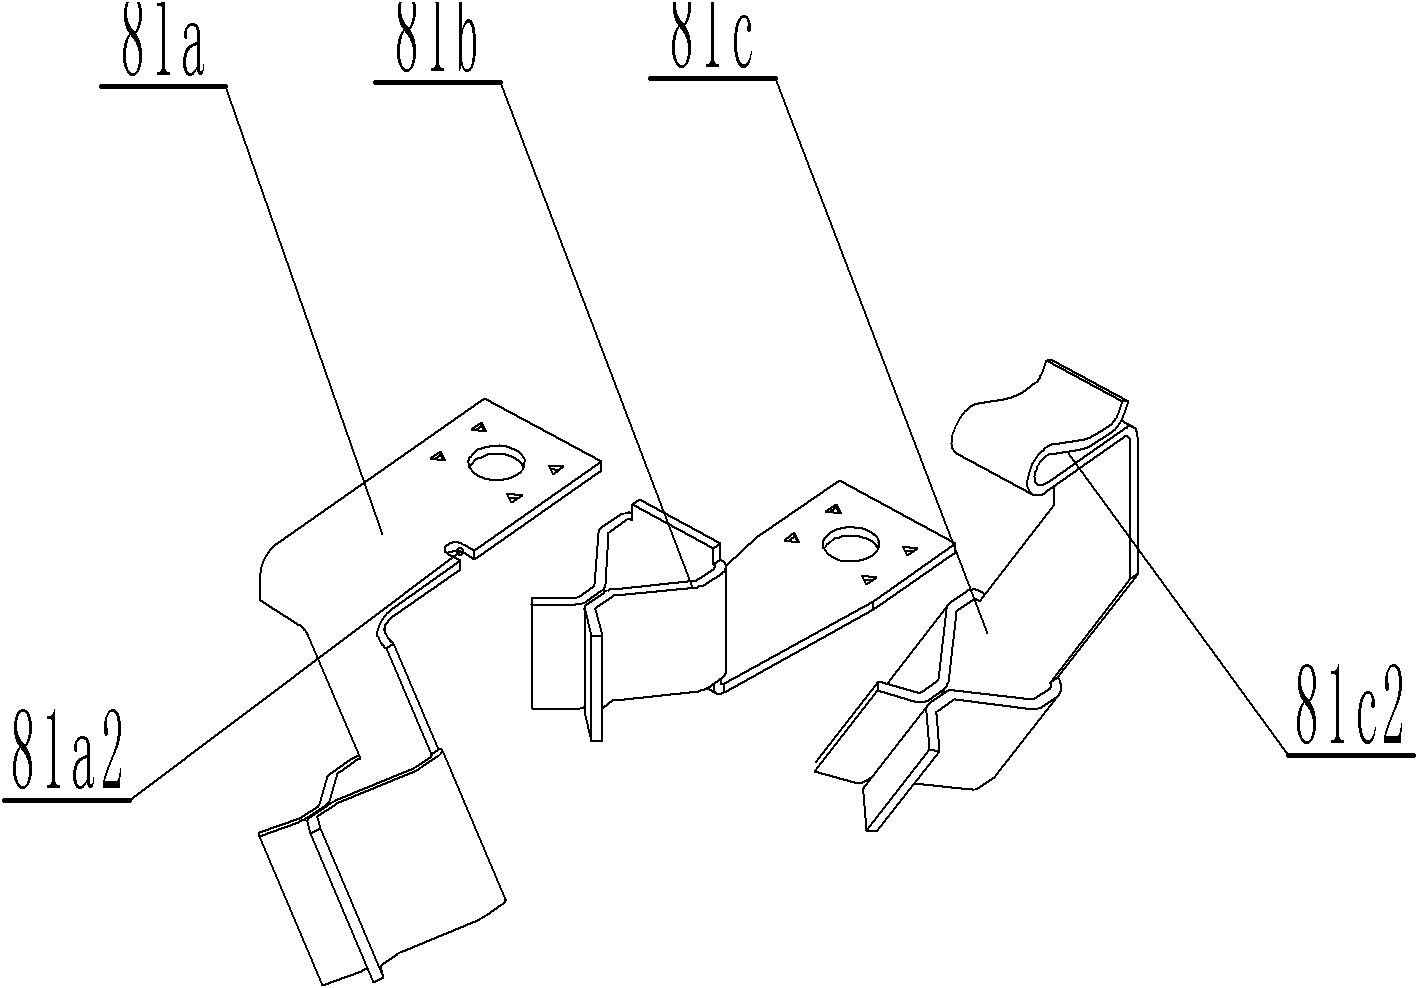 Wall-mounted high-current socket